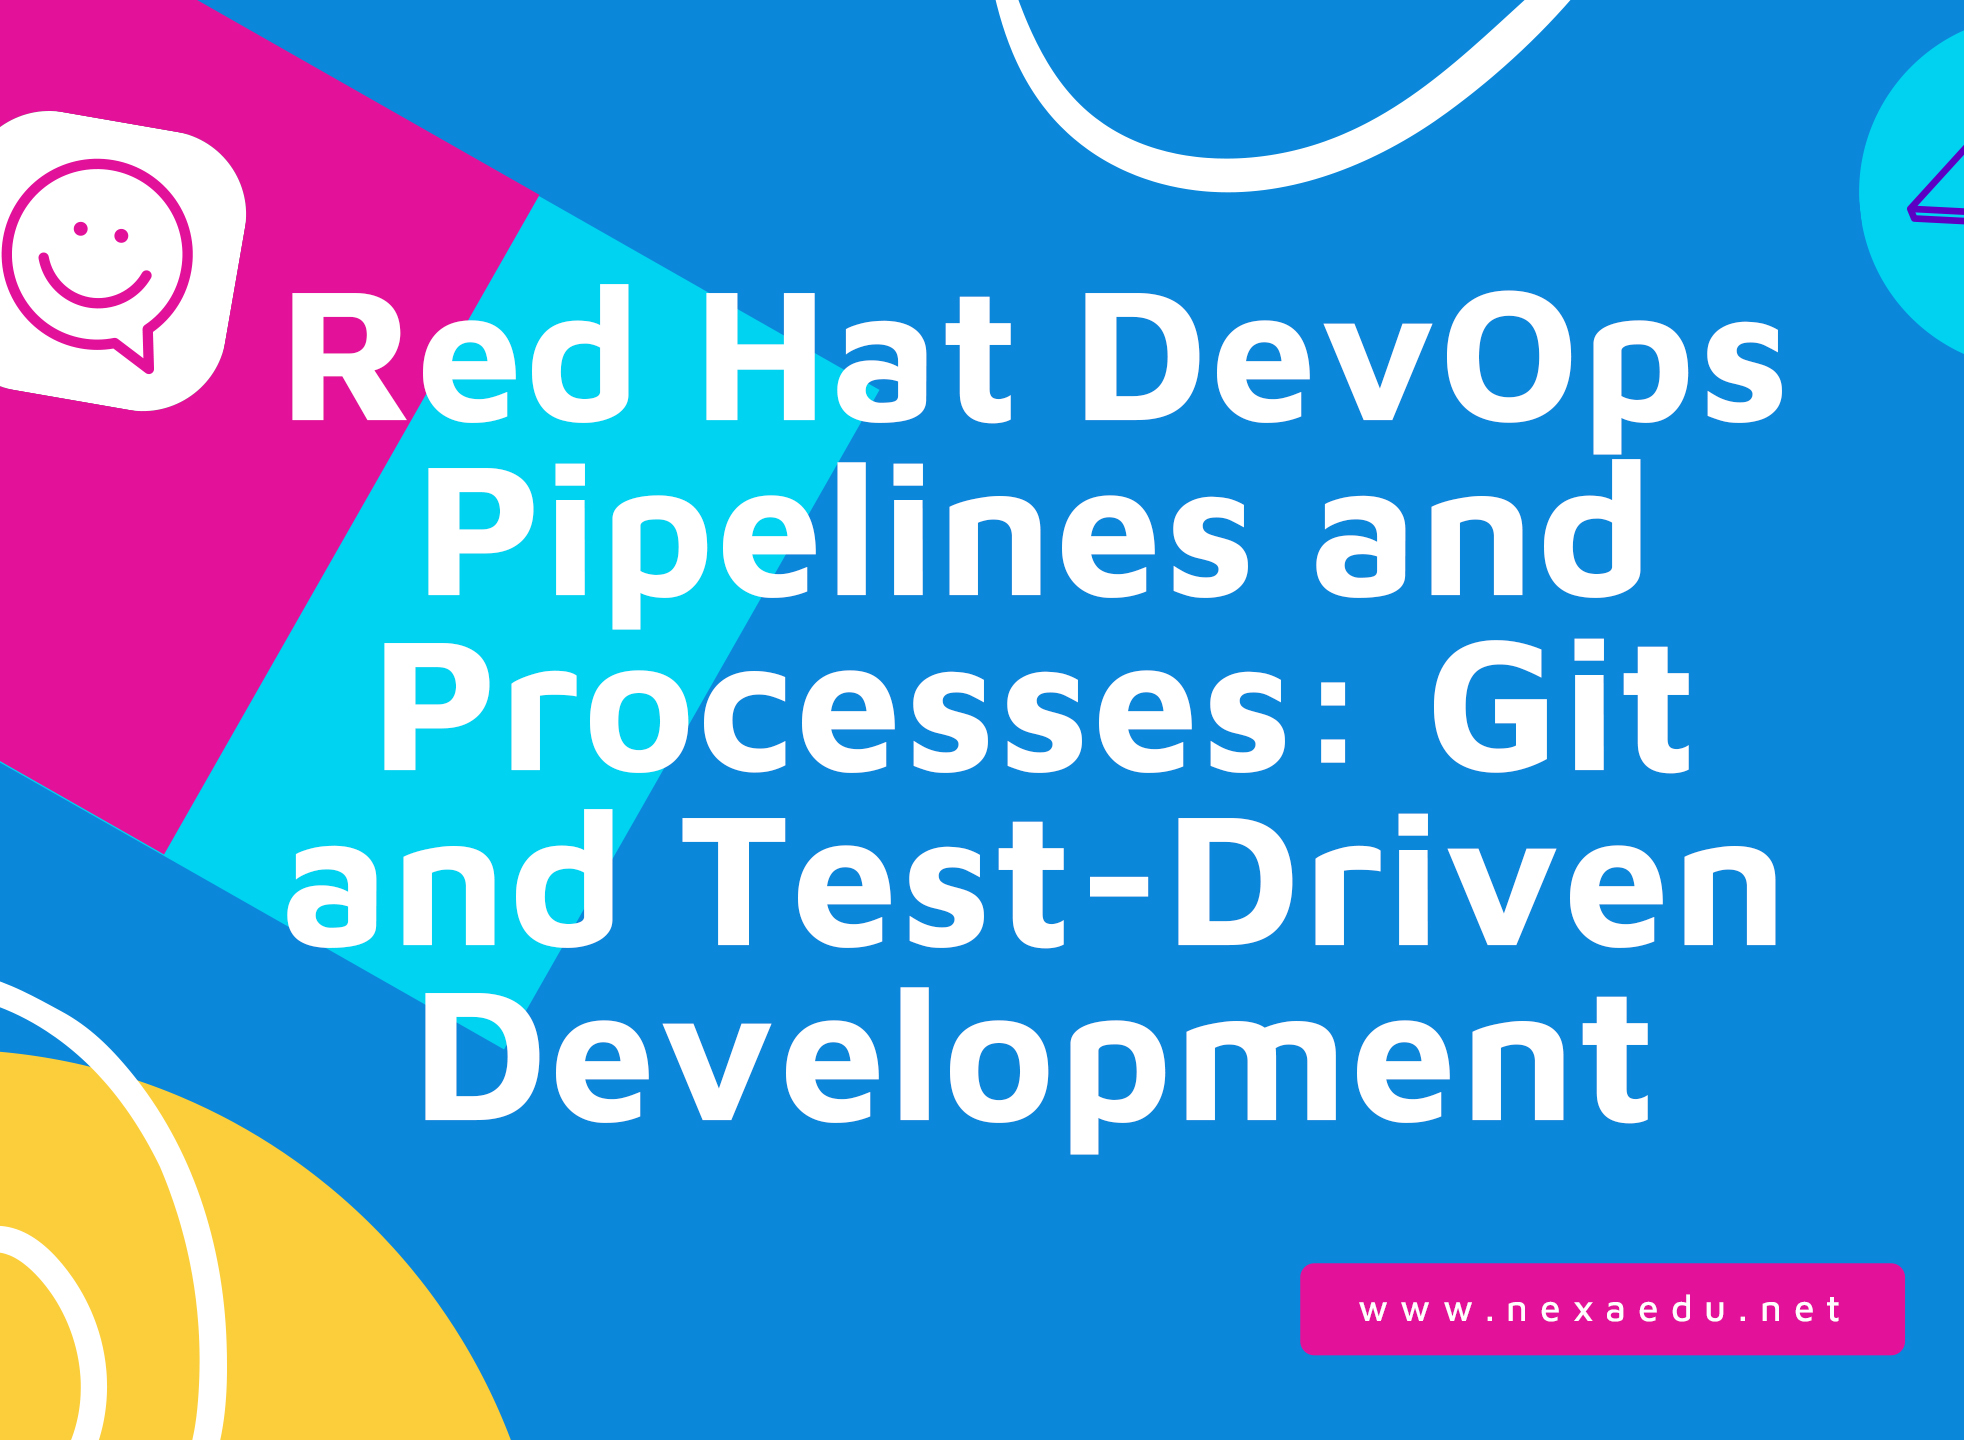 Red Hat DevOps Pipelines and Processes: Git and Test-Driven Development